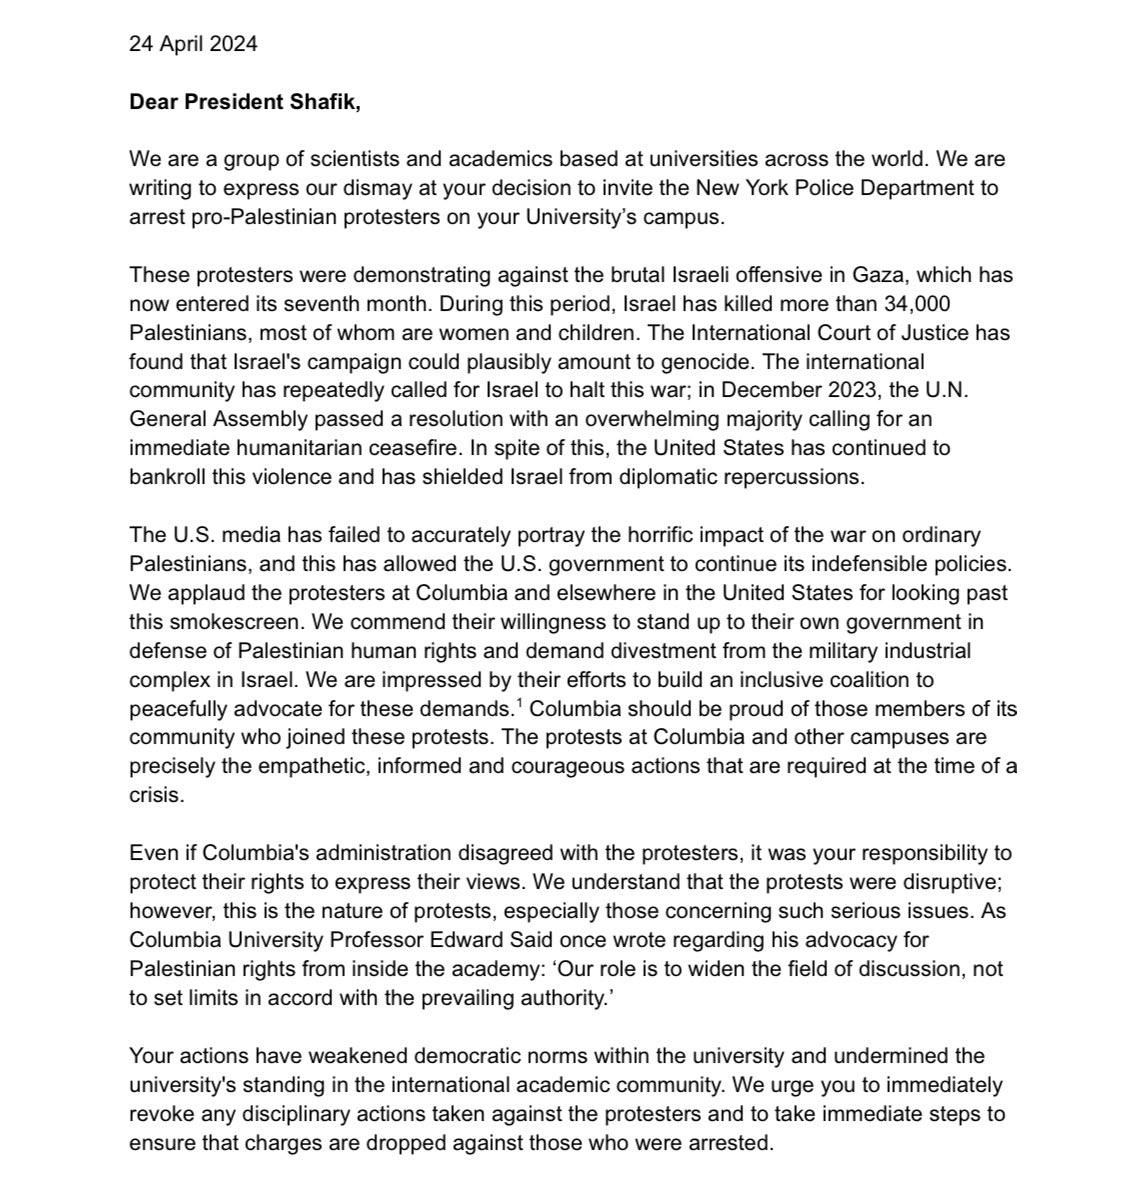 Nearly 1000 scientists & academics worldwide from India & the US to France & Mozambique condemn Columbia. Applaud American students for looking past the “smokescreen” of US media + building “an inclusive coalition to peacefully advocate” for Palestinian human rights & divestment.